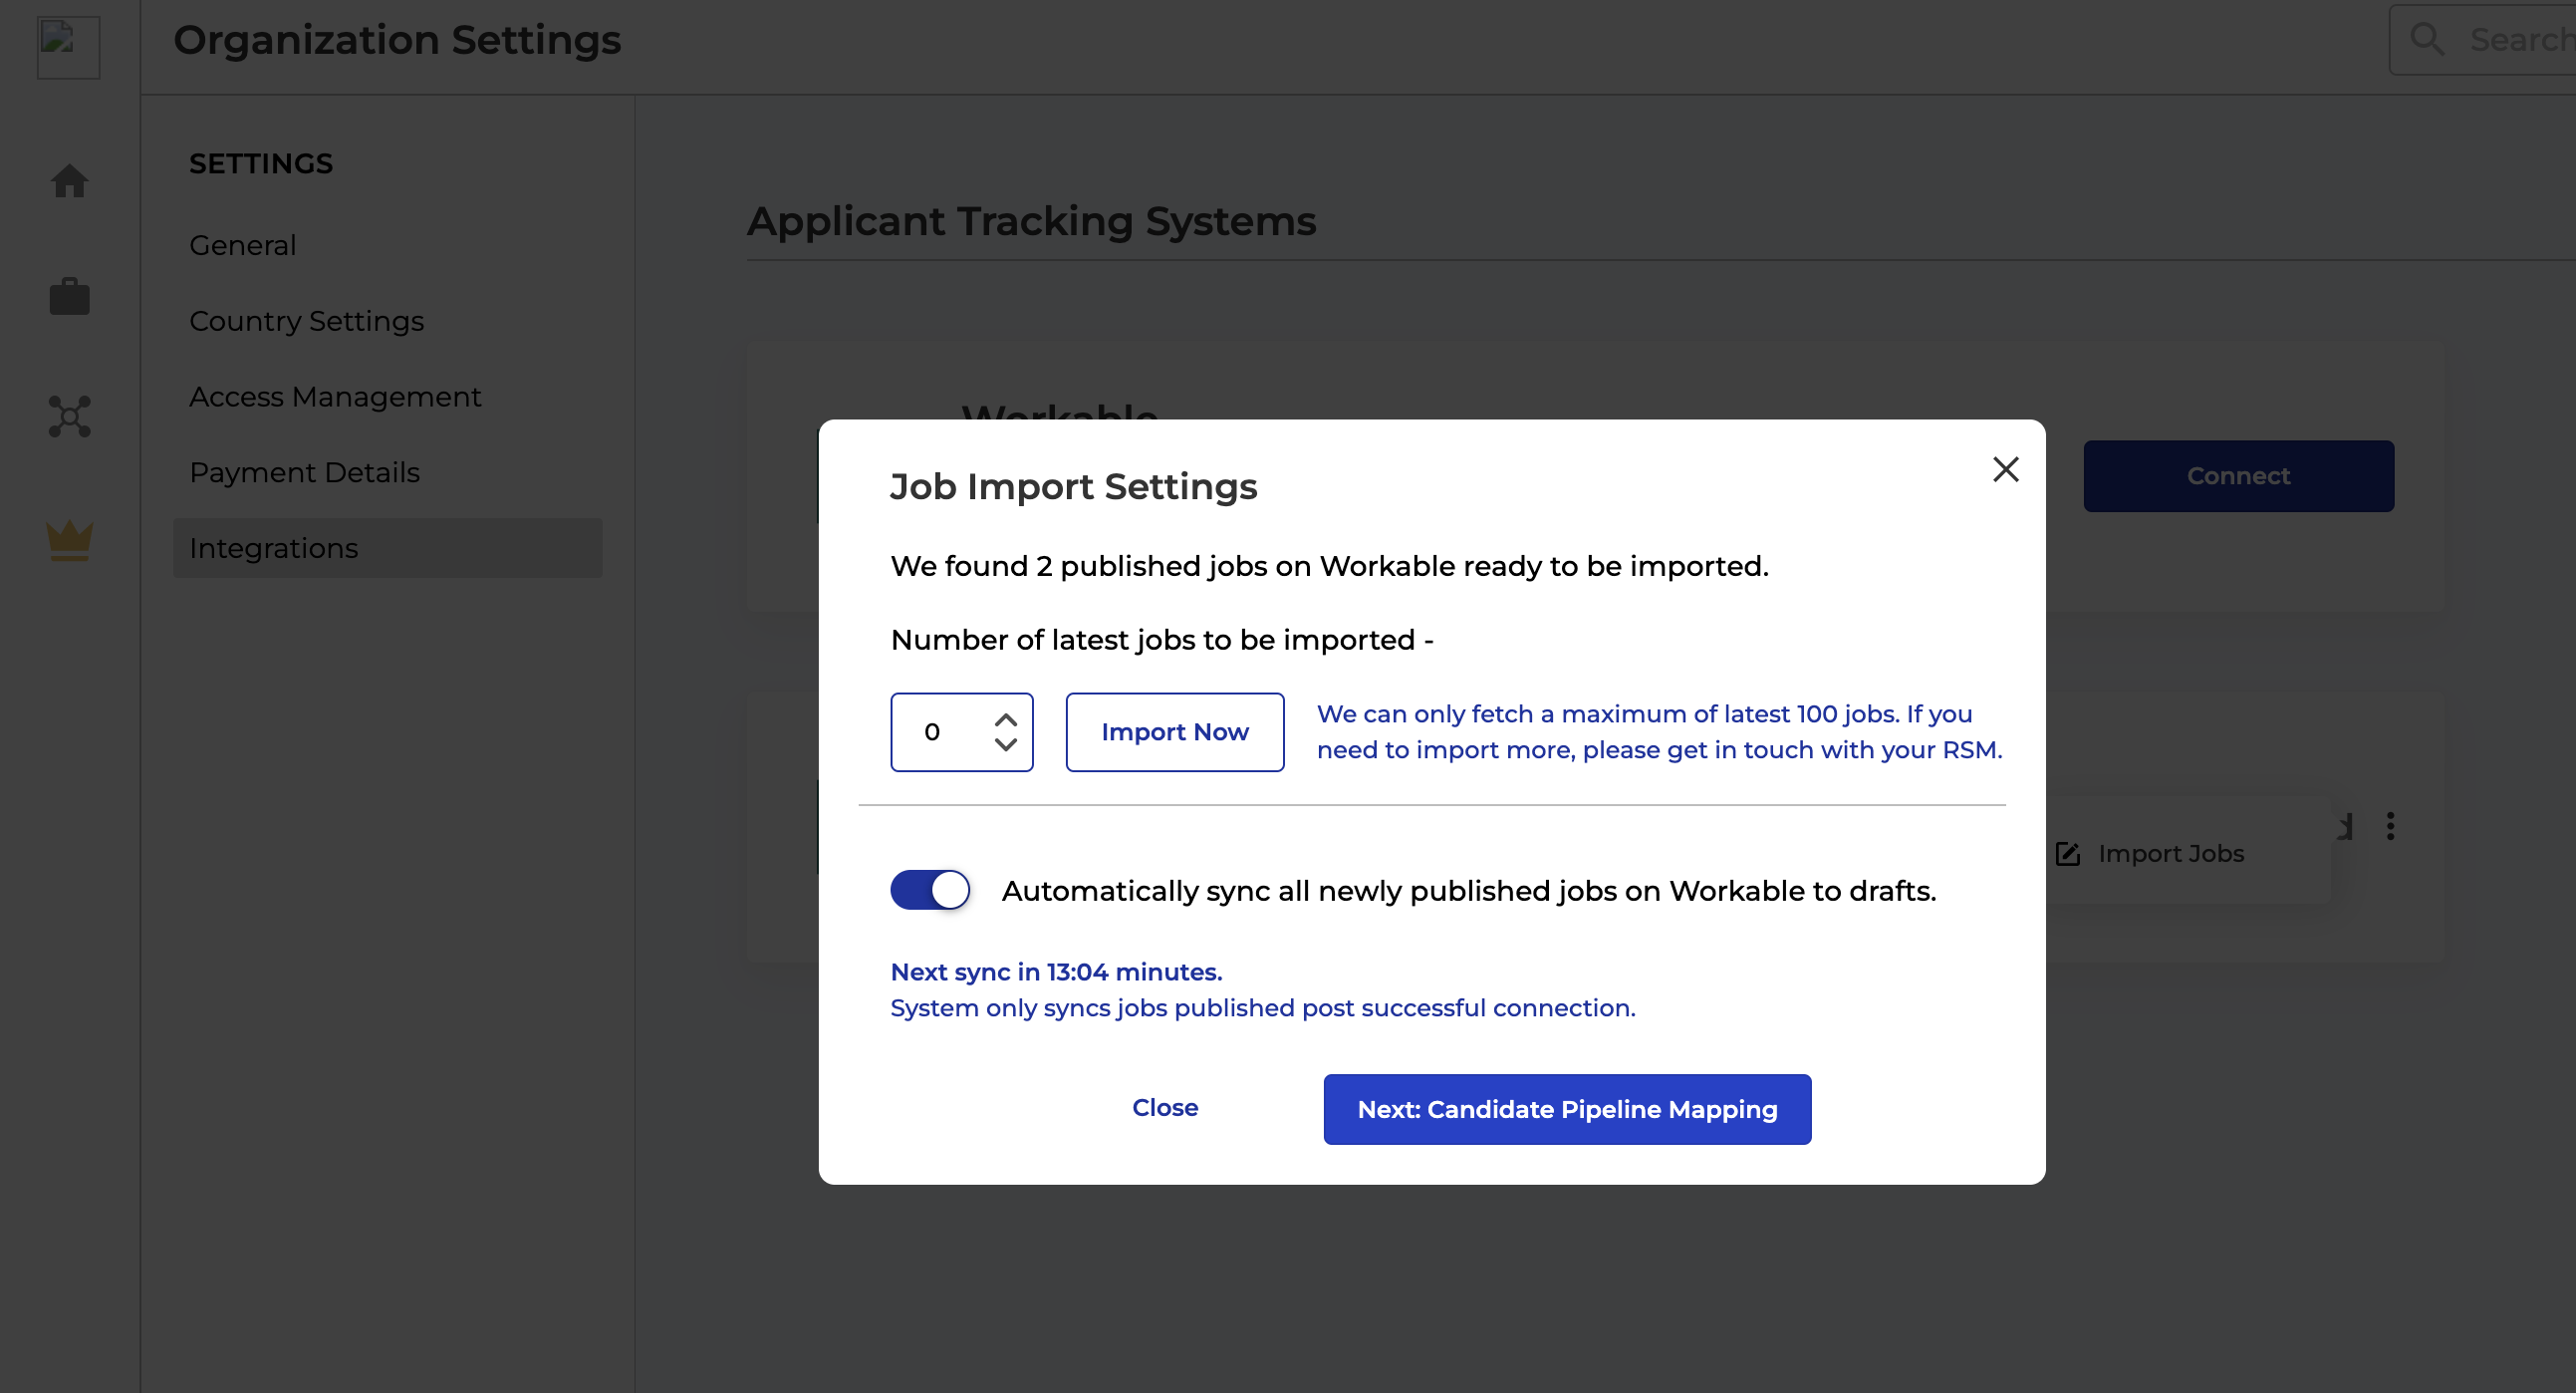 Spottabl platform job import settings modal with automatically sync all newly published jobs toggle on.